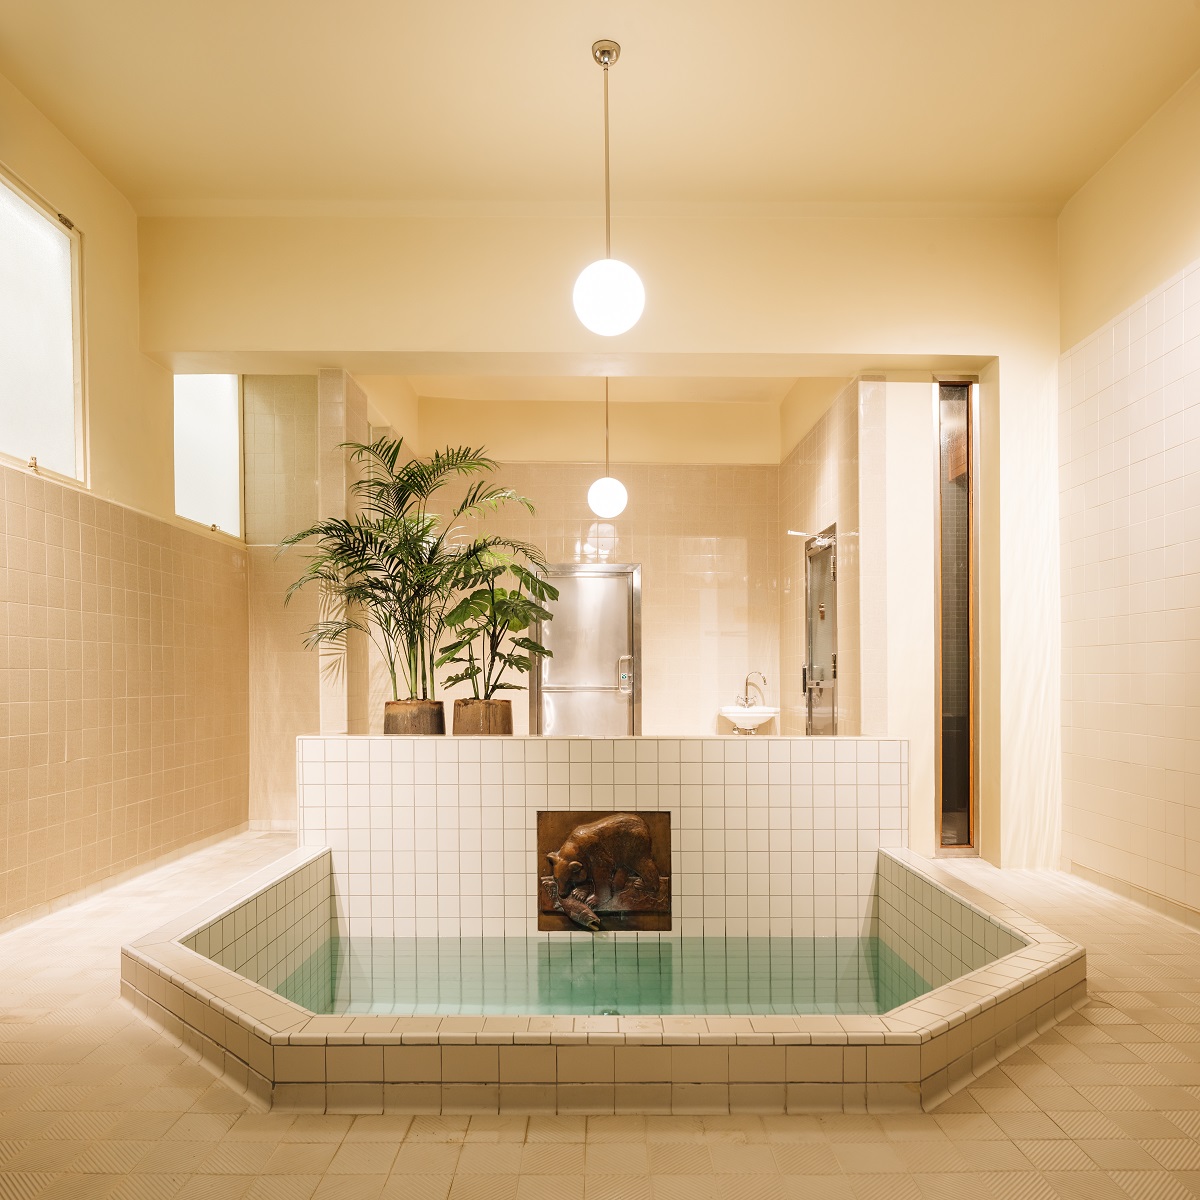 traditional Nordic thermotherapy circuit includes an infrared sauna and cold plunge pool